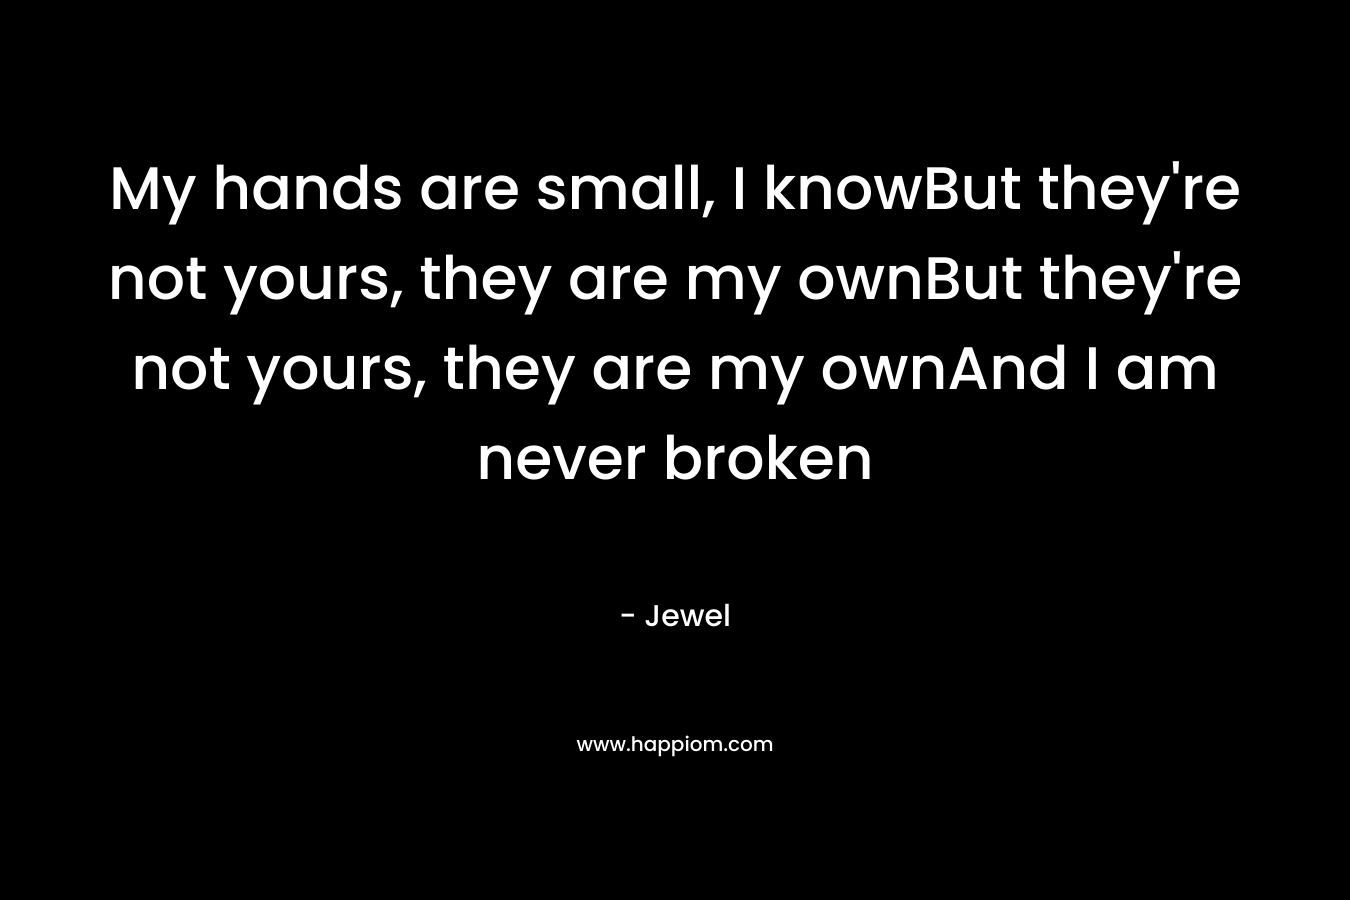 My hands are small, I knowBut they're not yours, they are my ownBut they're not yours, they are my ownAnd I am never broken